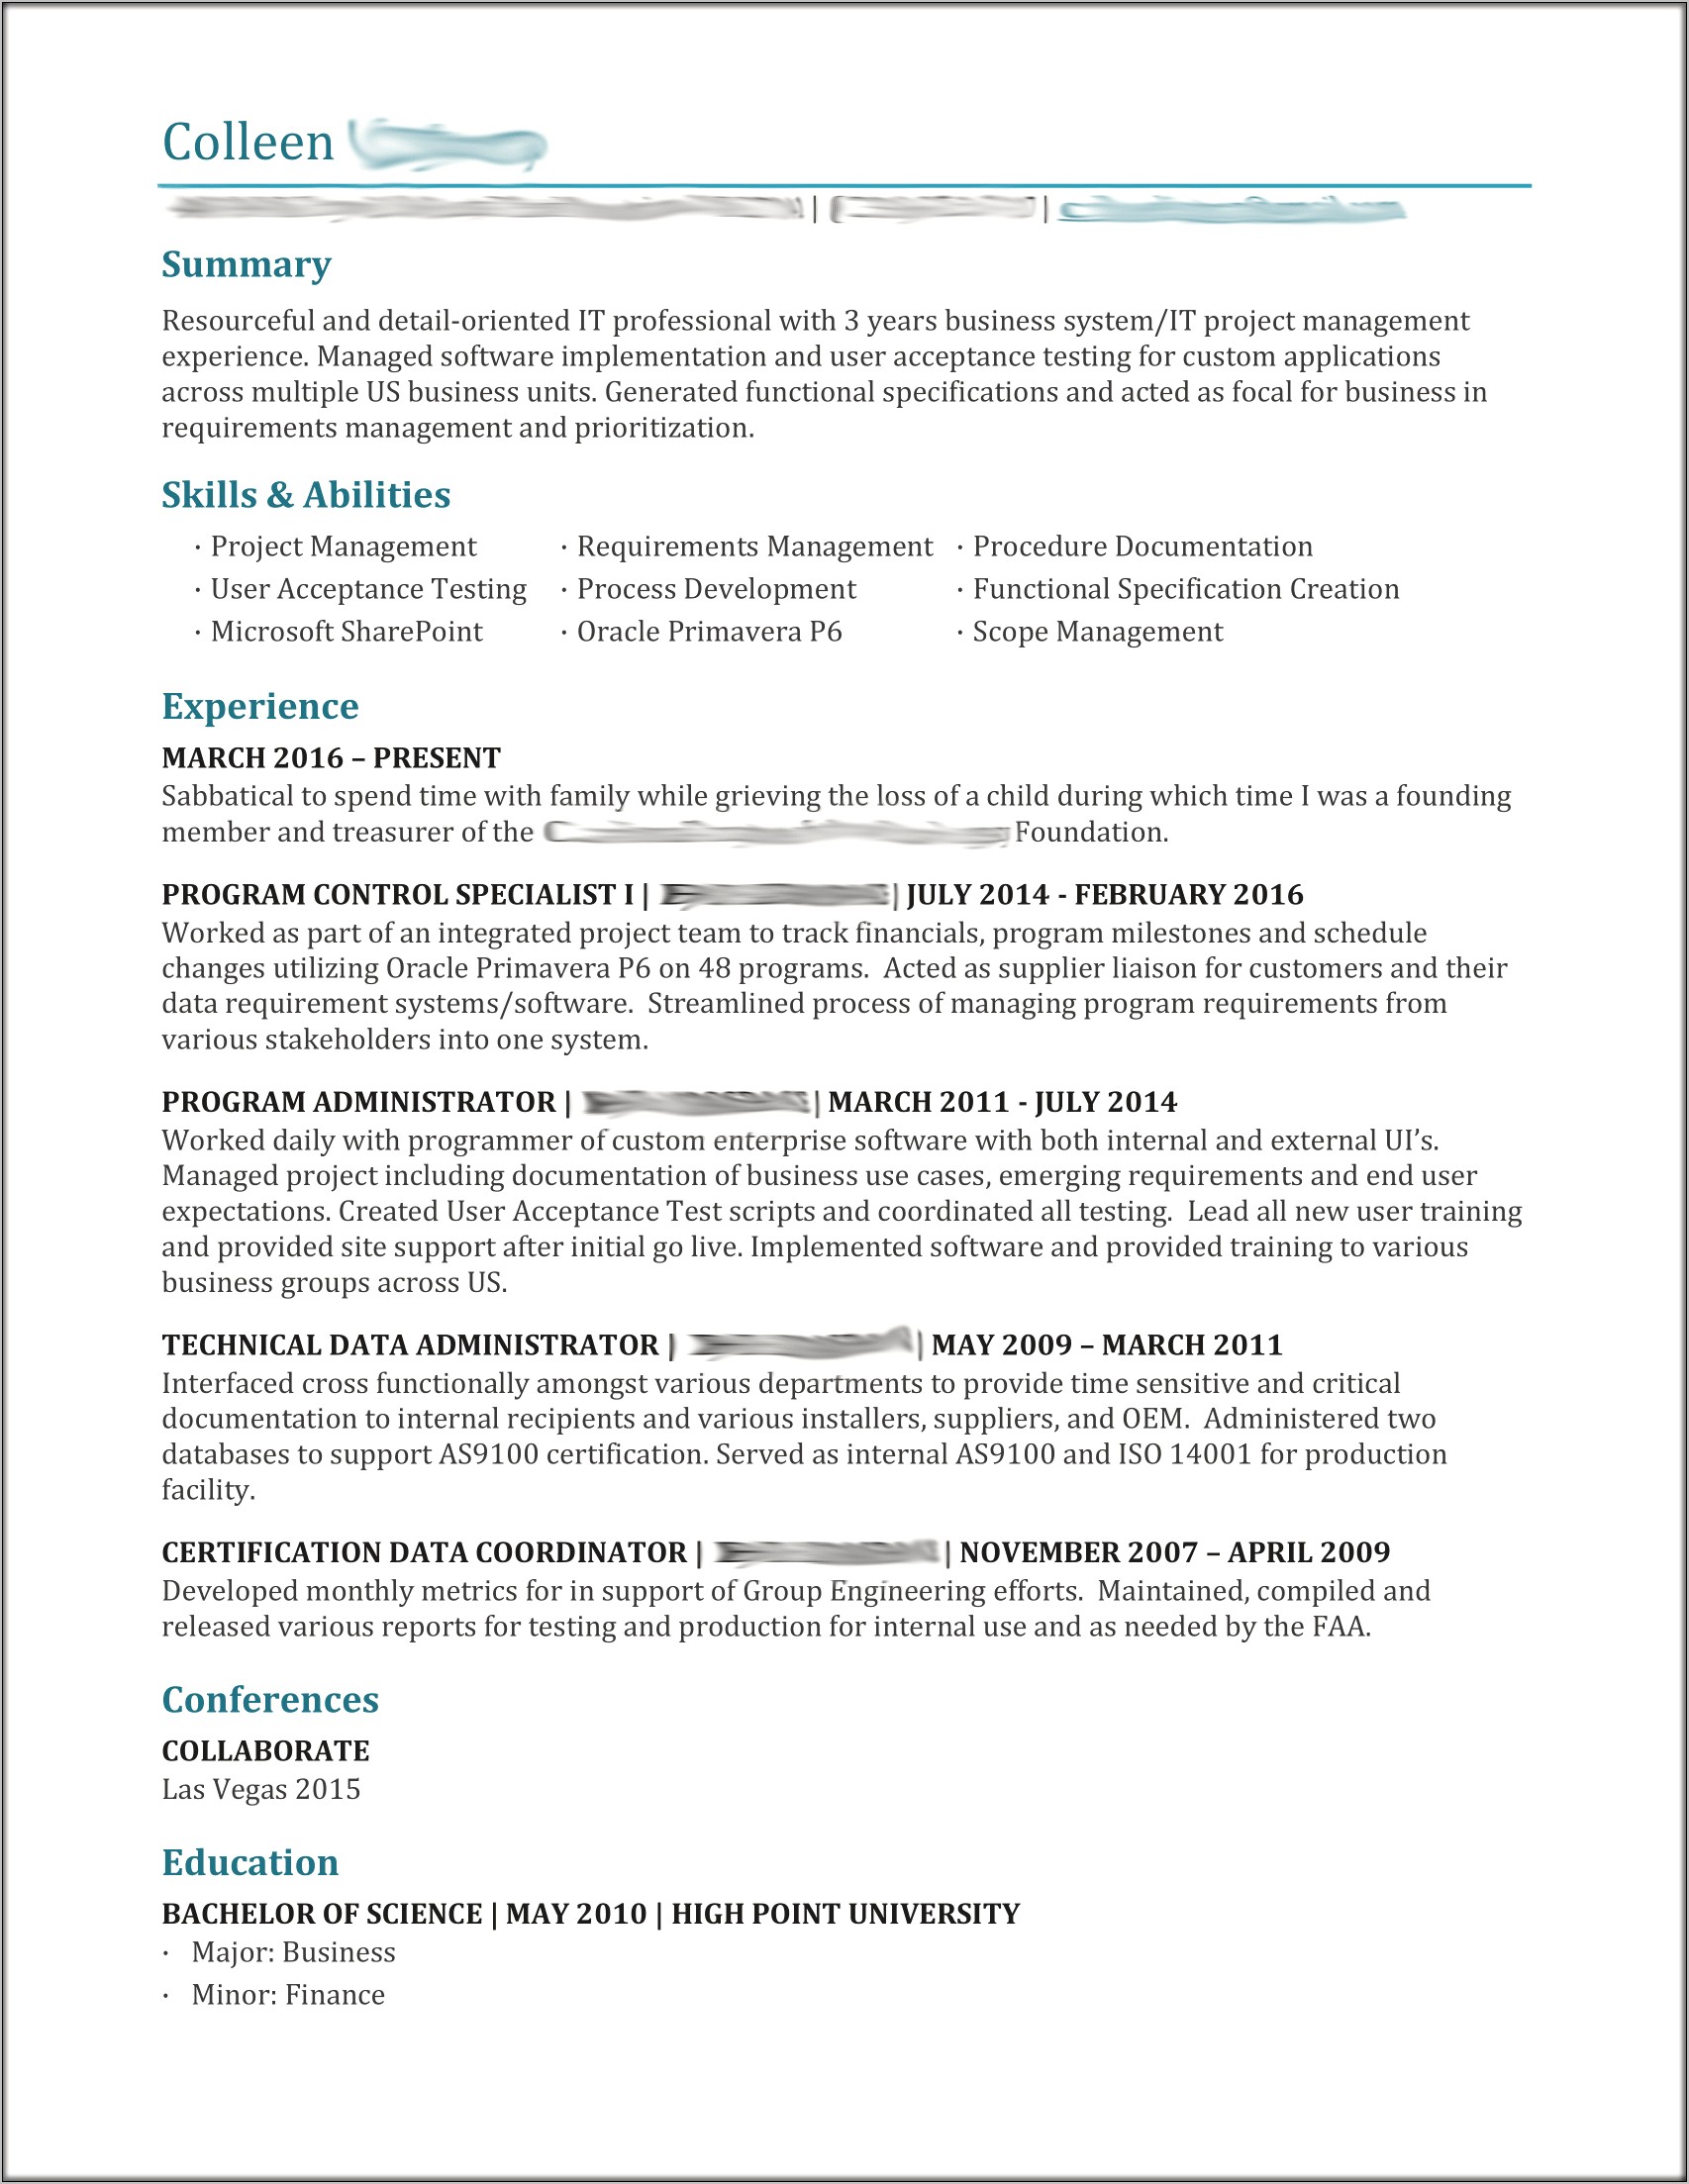 Example Of A Stand Out Resume